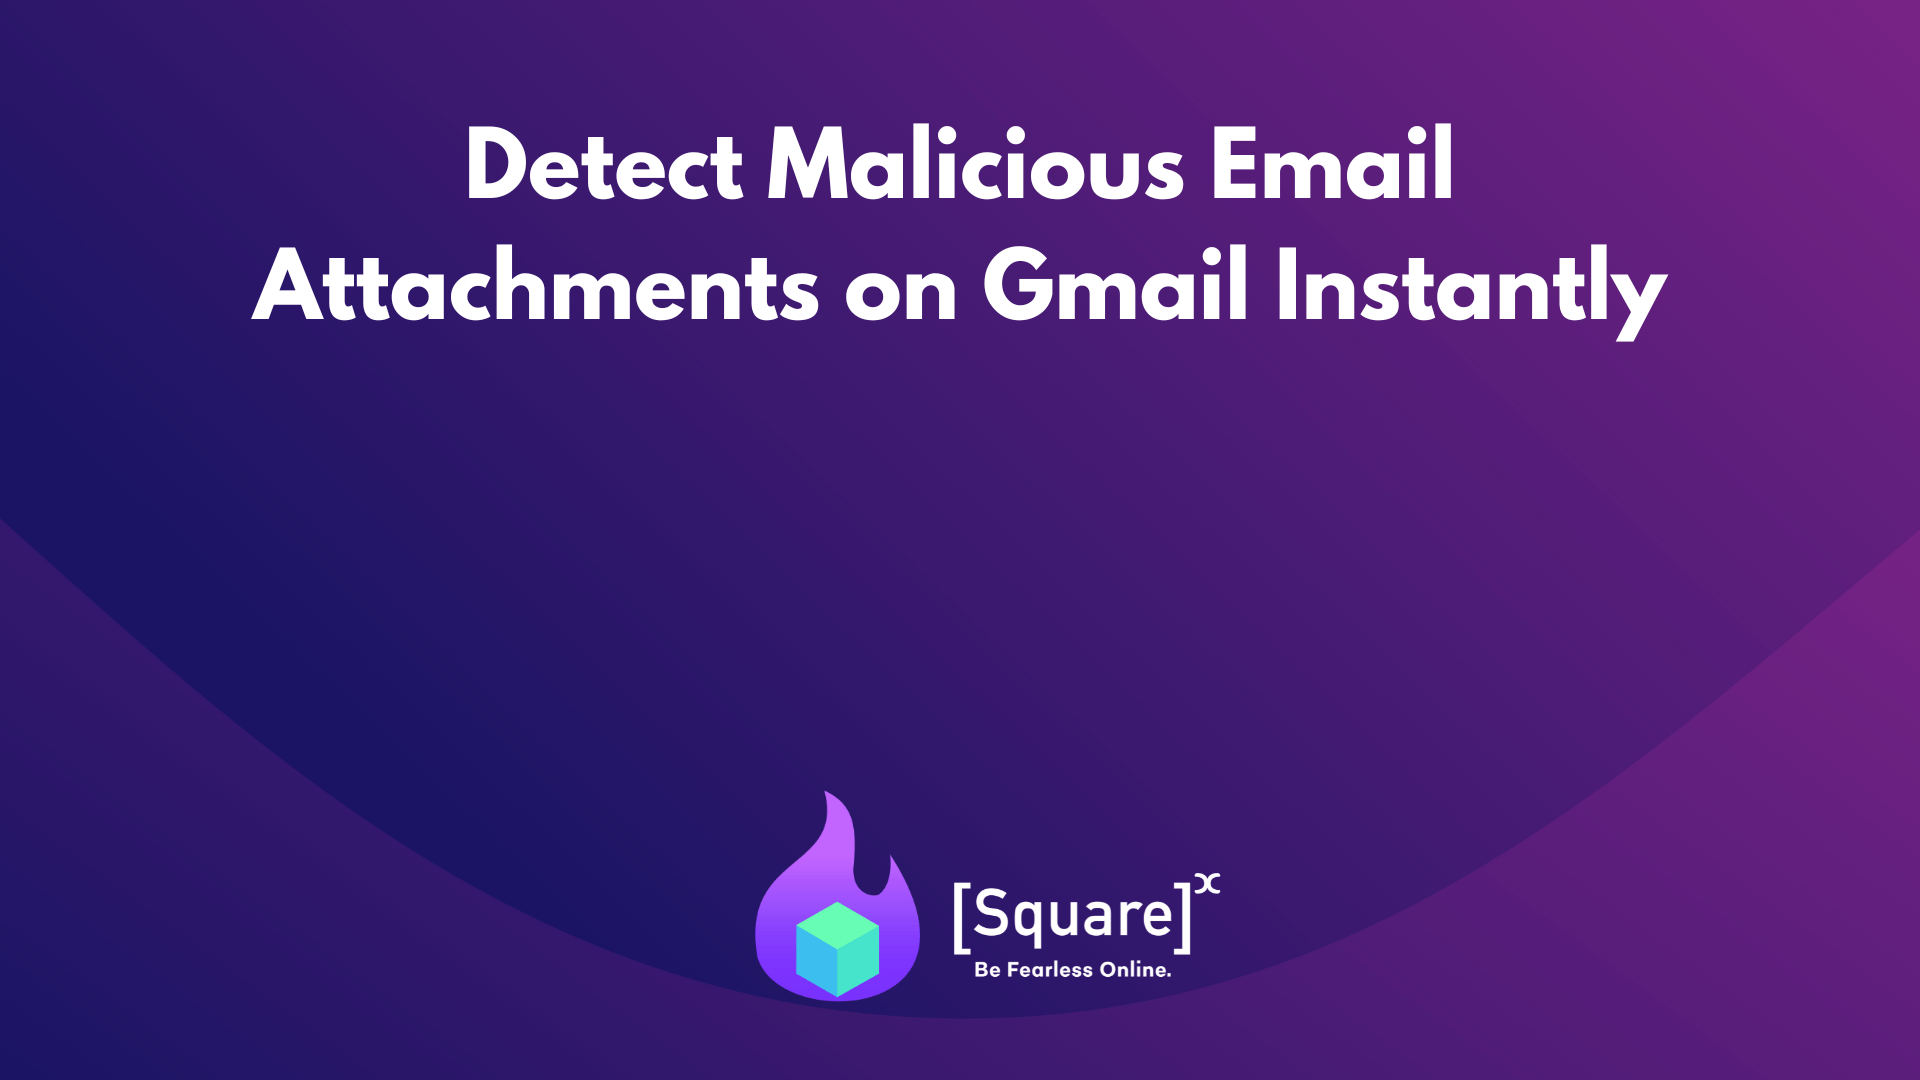 Detect Malicious Email Attachments on Gmail Instantly